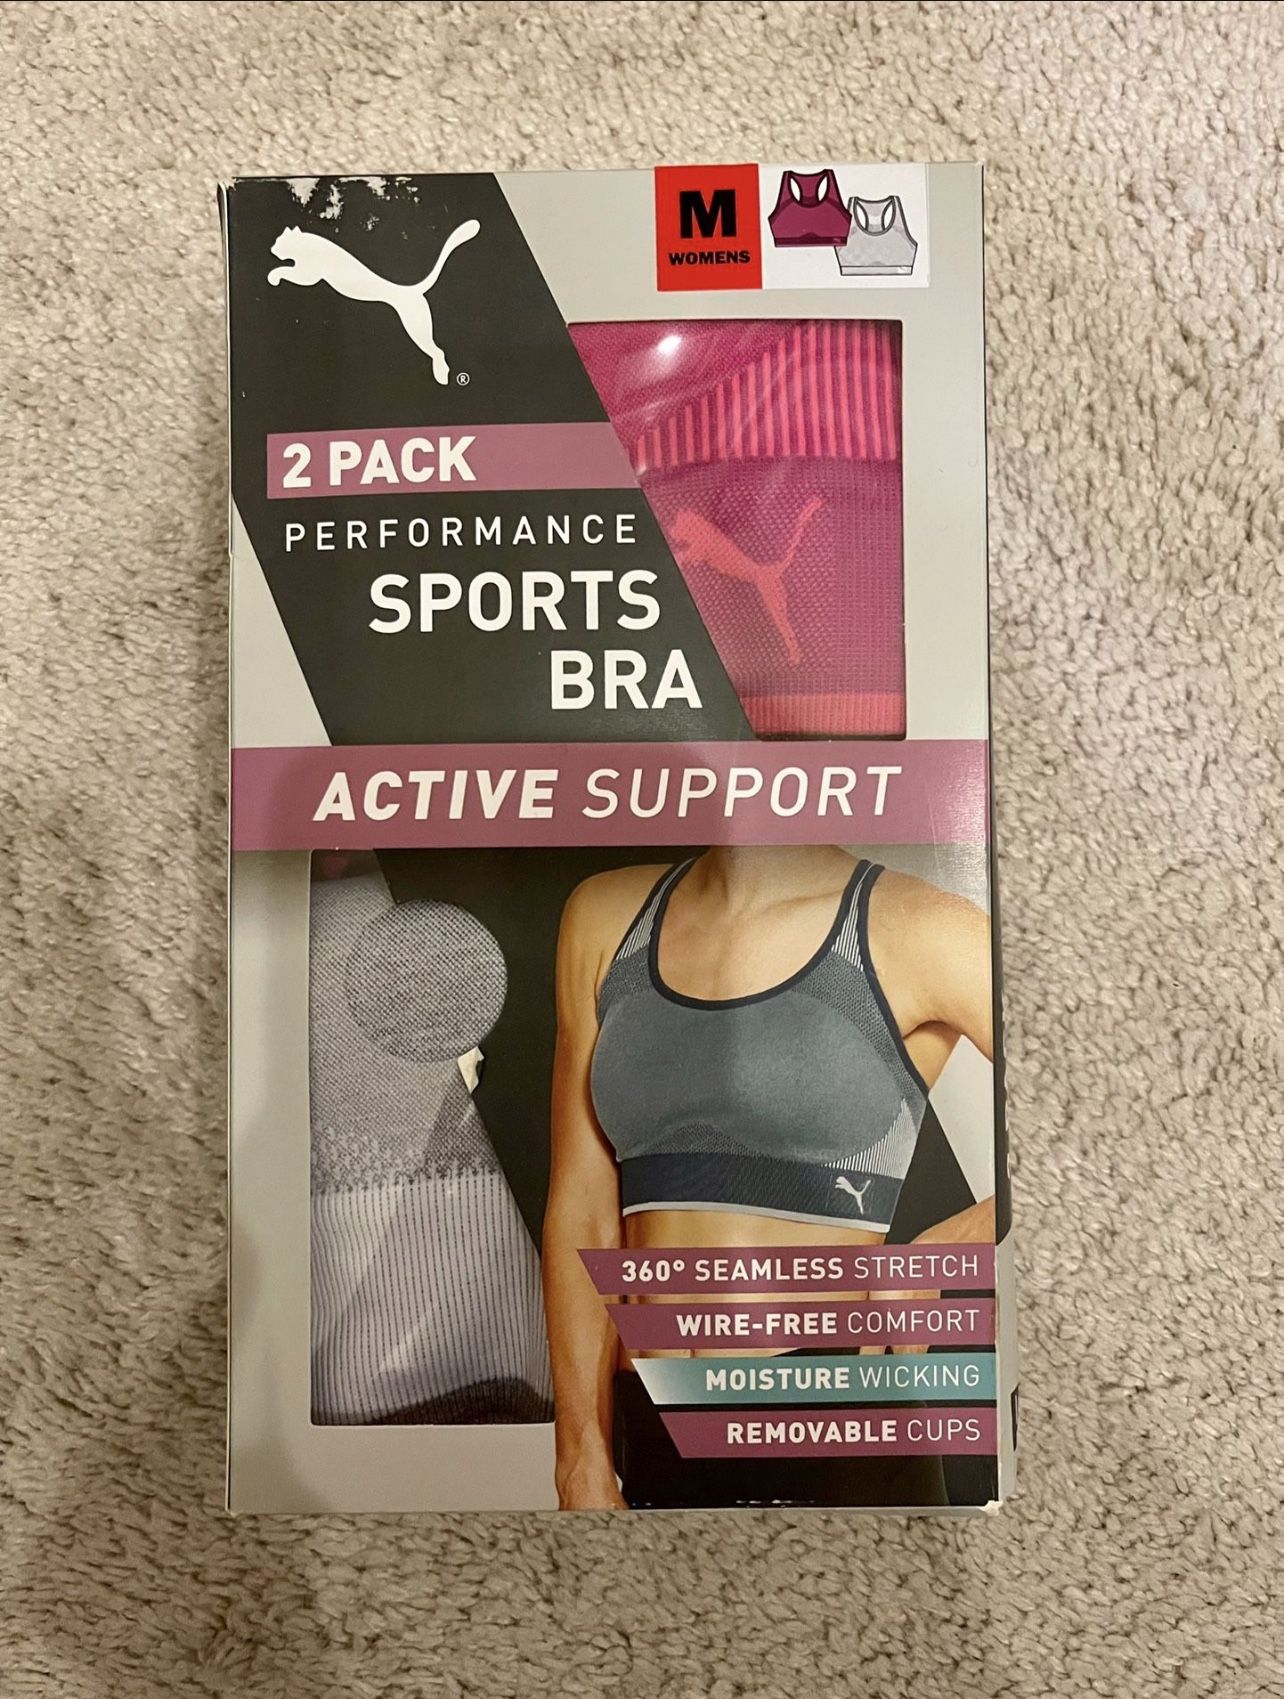 Puma Women's Sports Bra 2 Pack Seamless Removable Cups Size: M, Pink/White